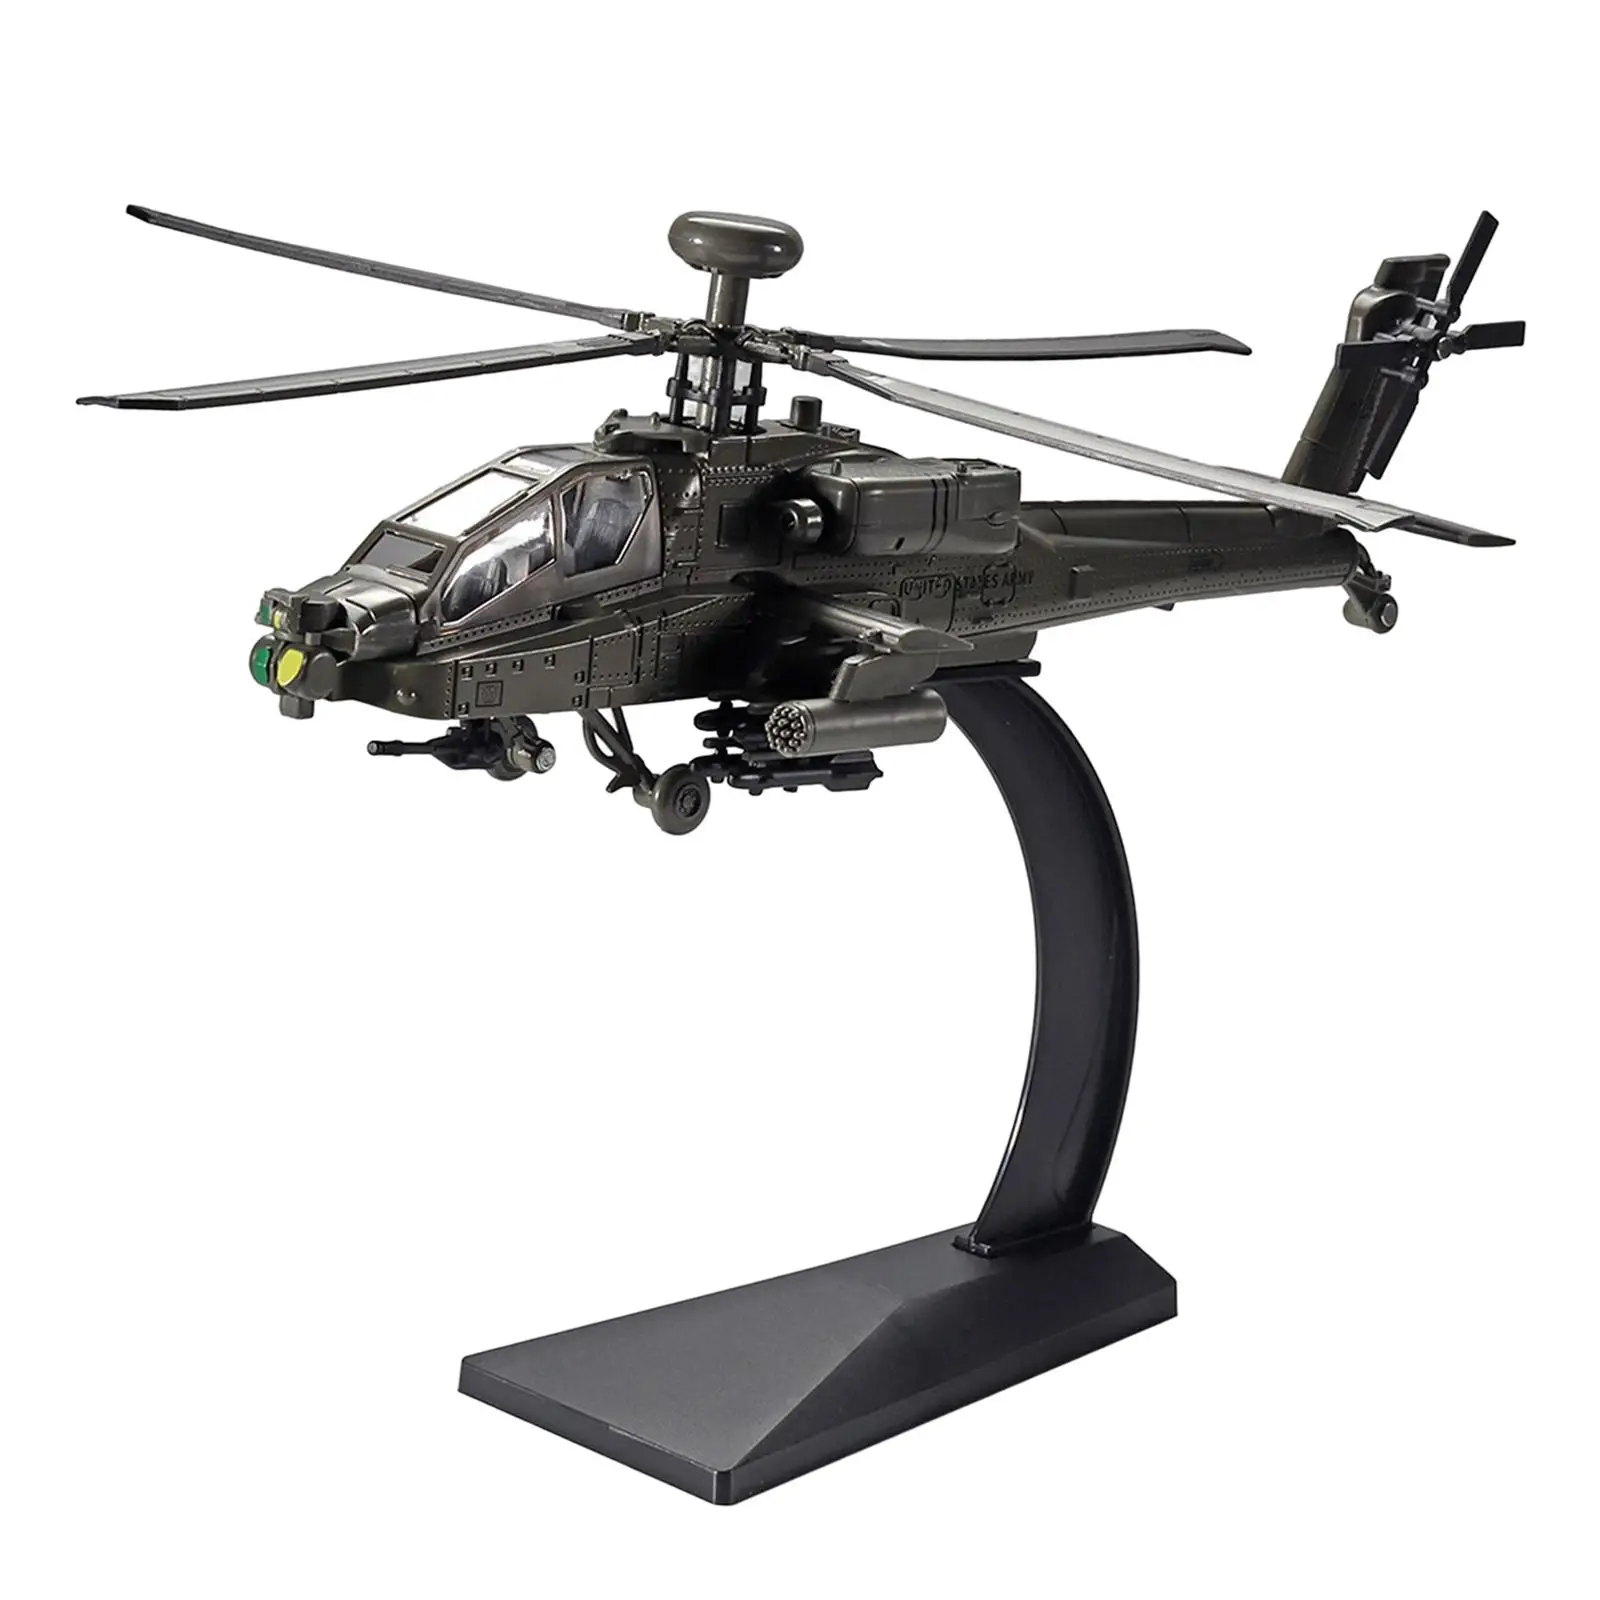 cast Metal Aircraft Model collection Simulation Durable Helicopter Model Airplane Aircraft for Desktop Office Decor